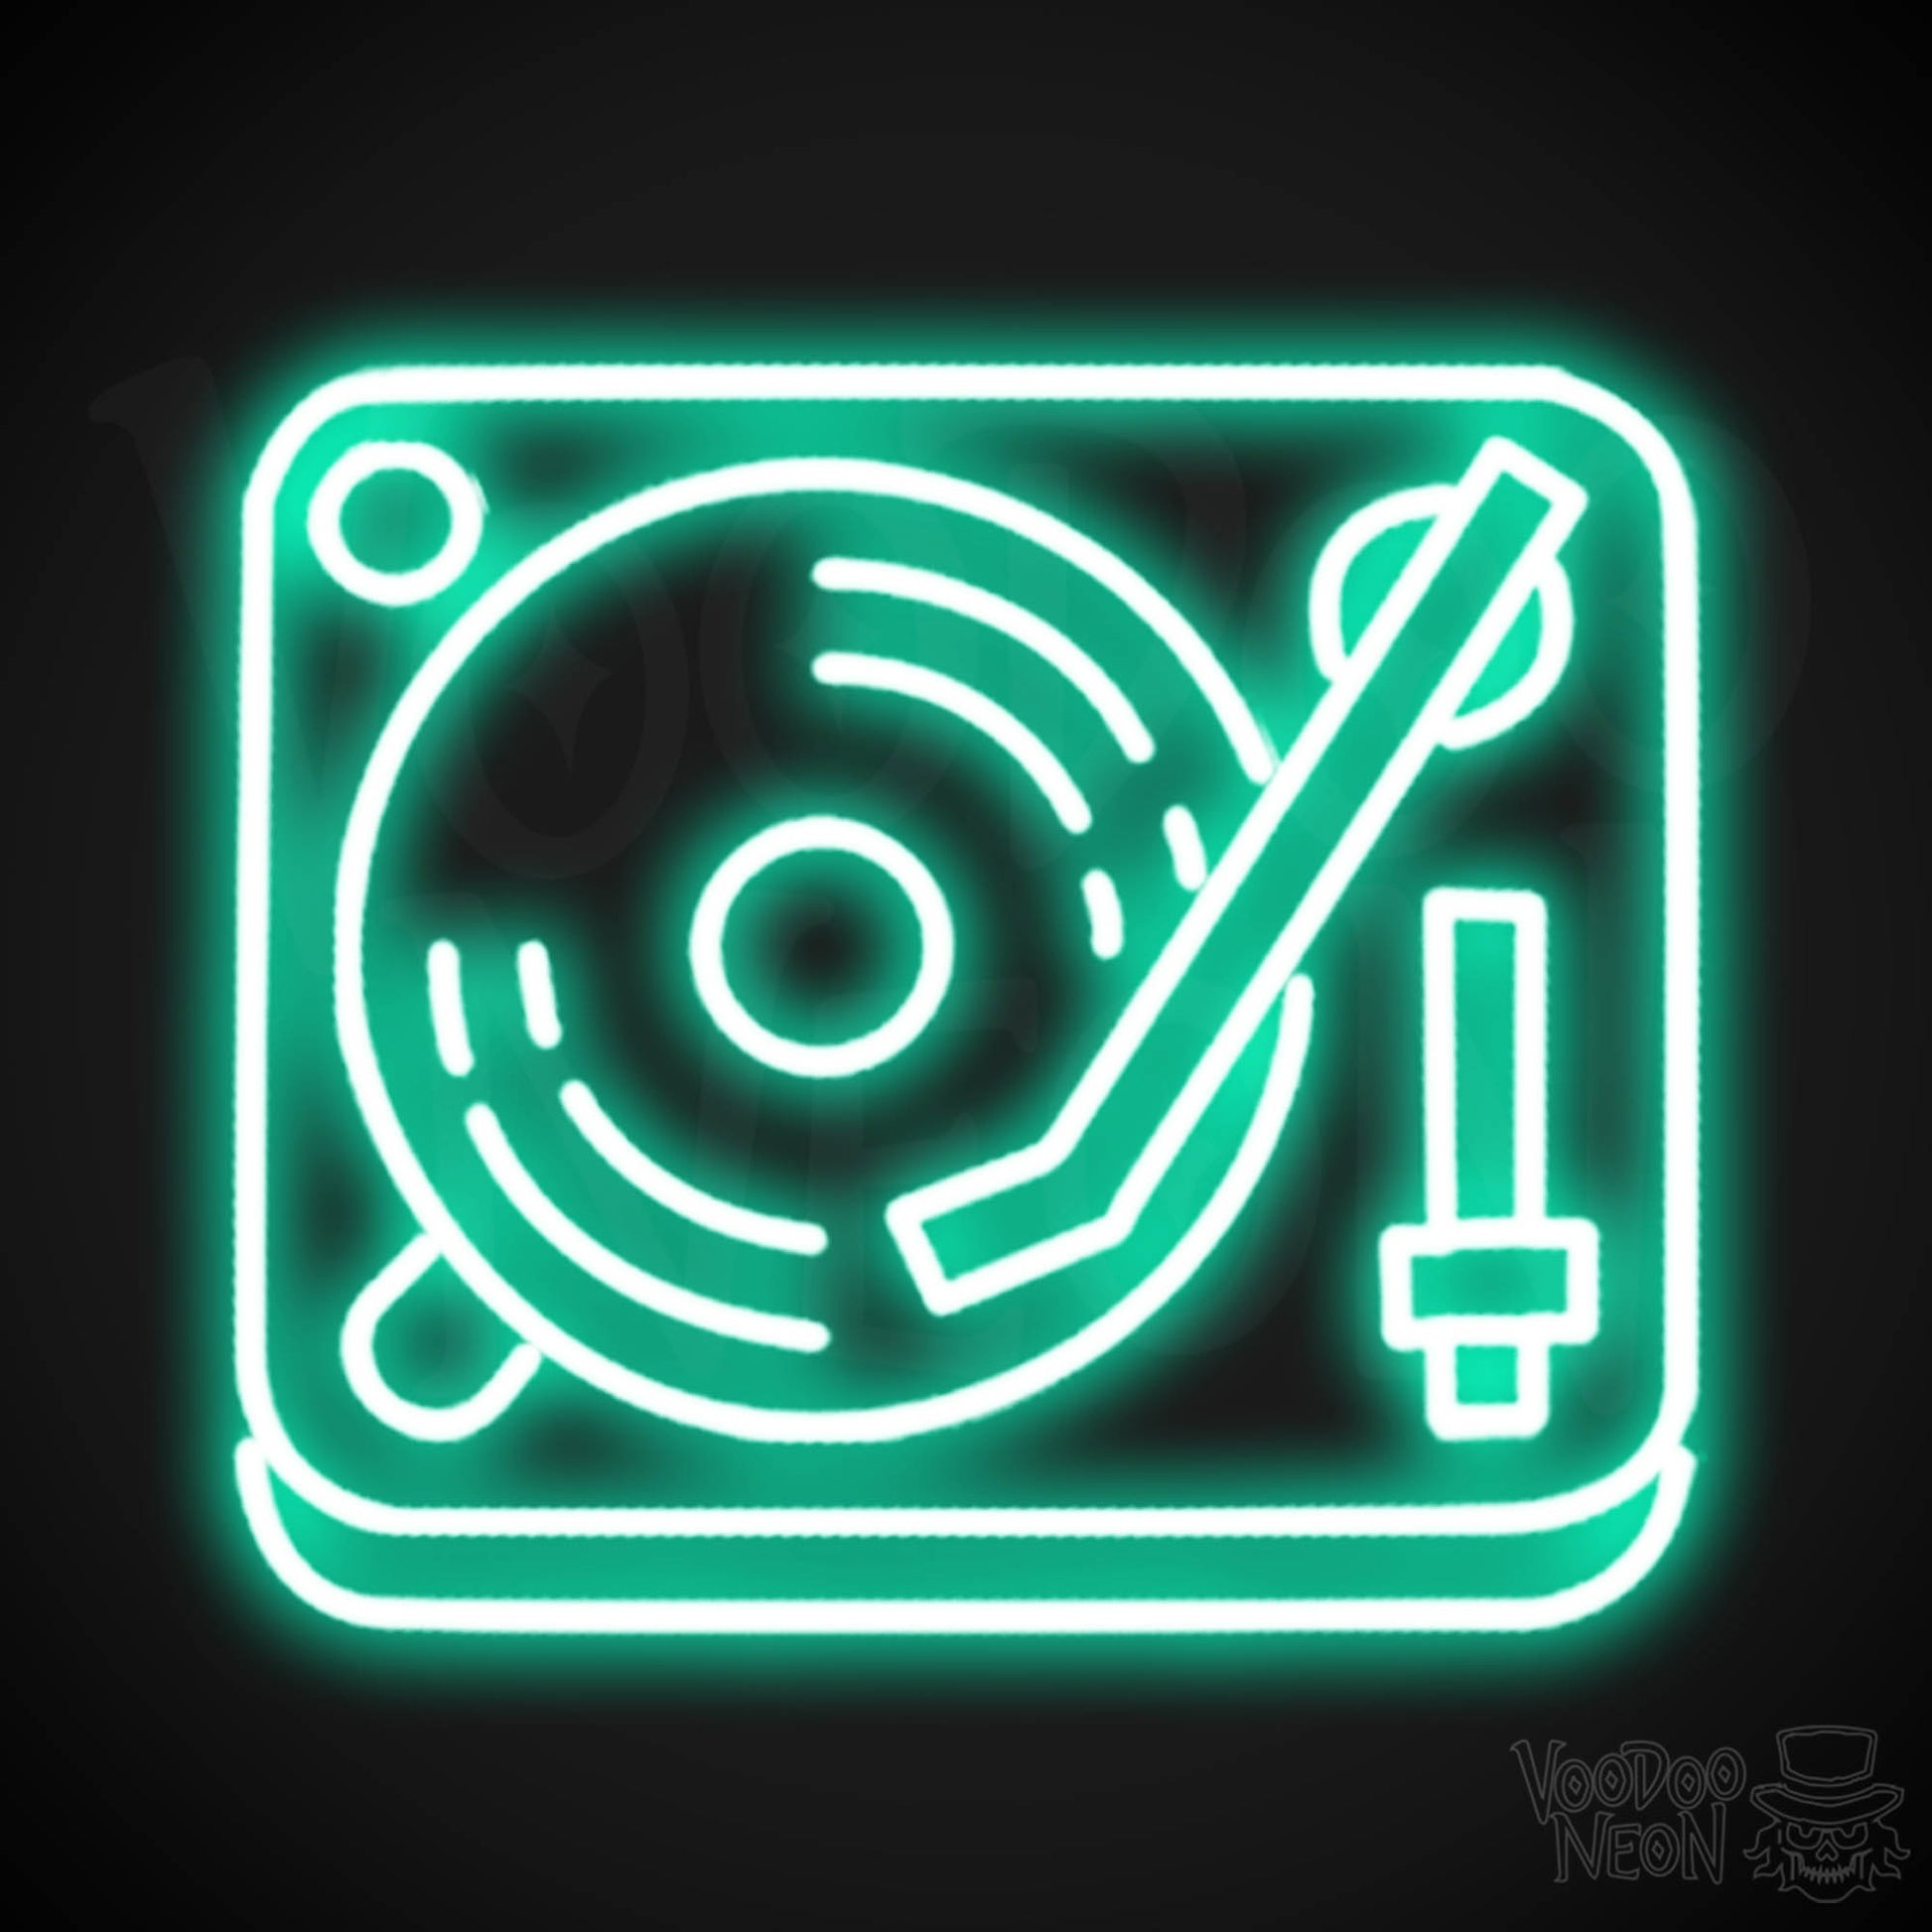 Retro Record Player Neon Sign - Record Player Neon Wall Art - Color Light Green